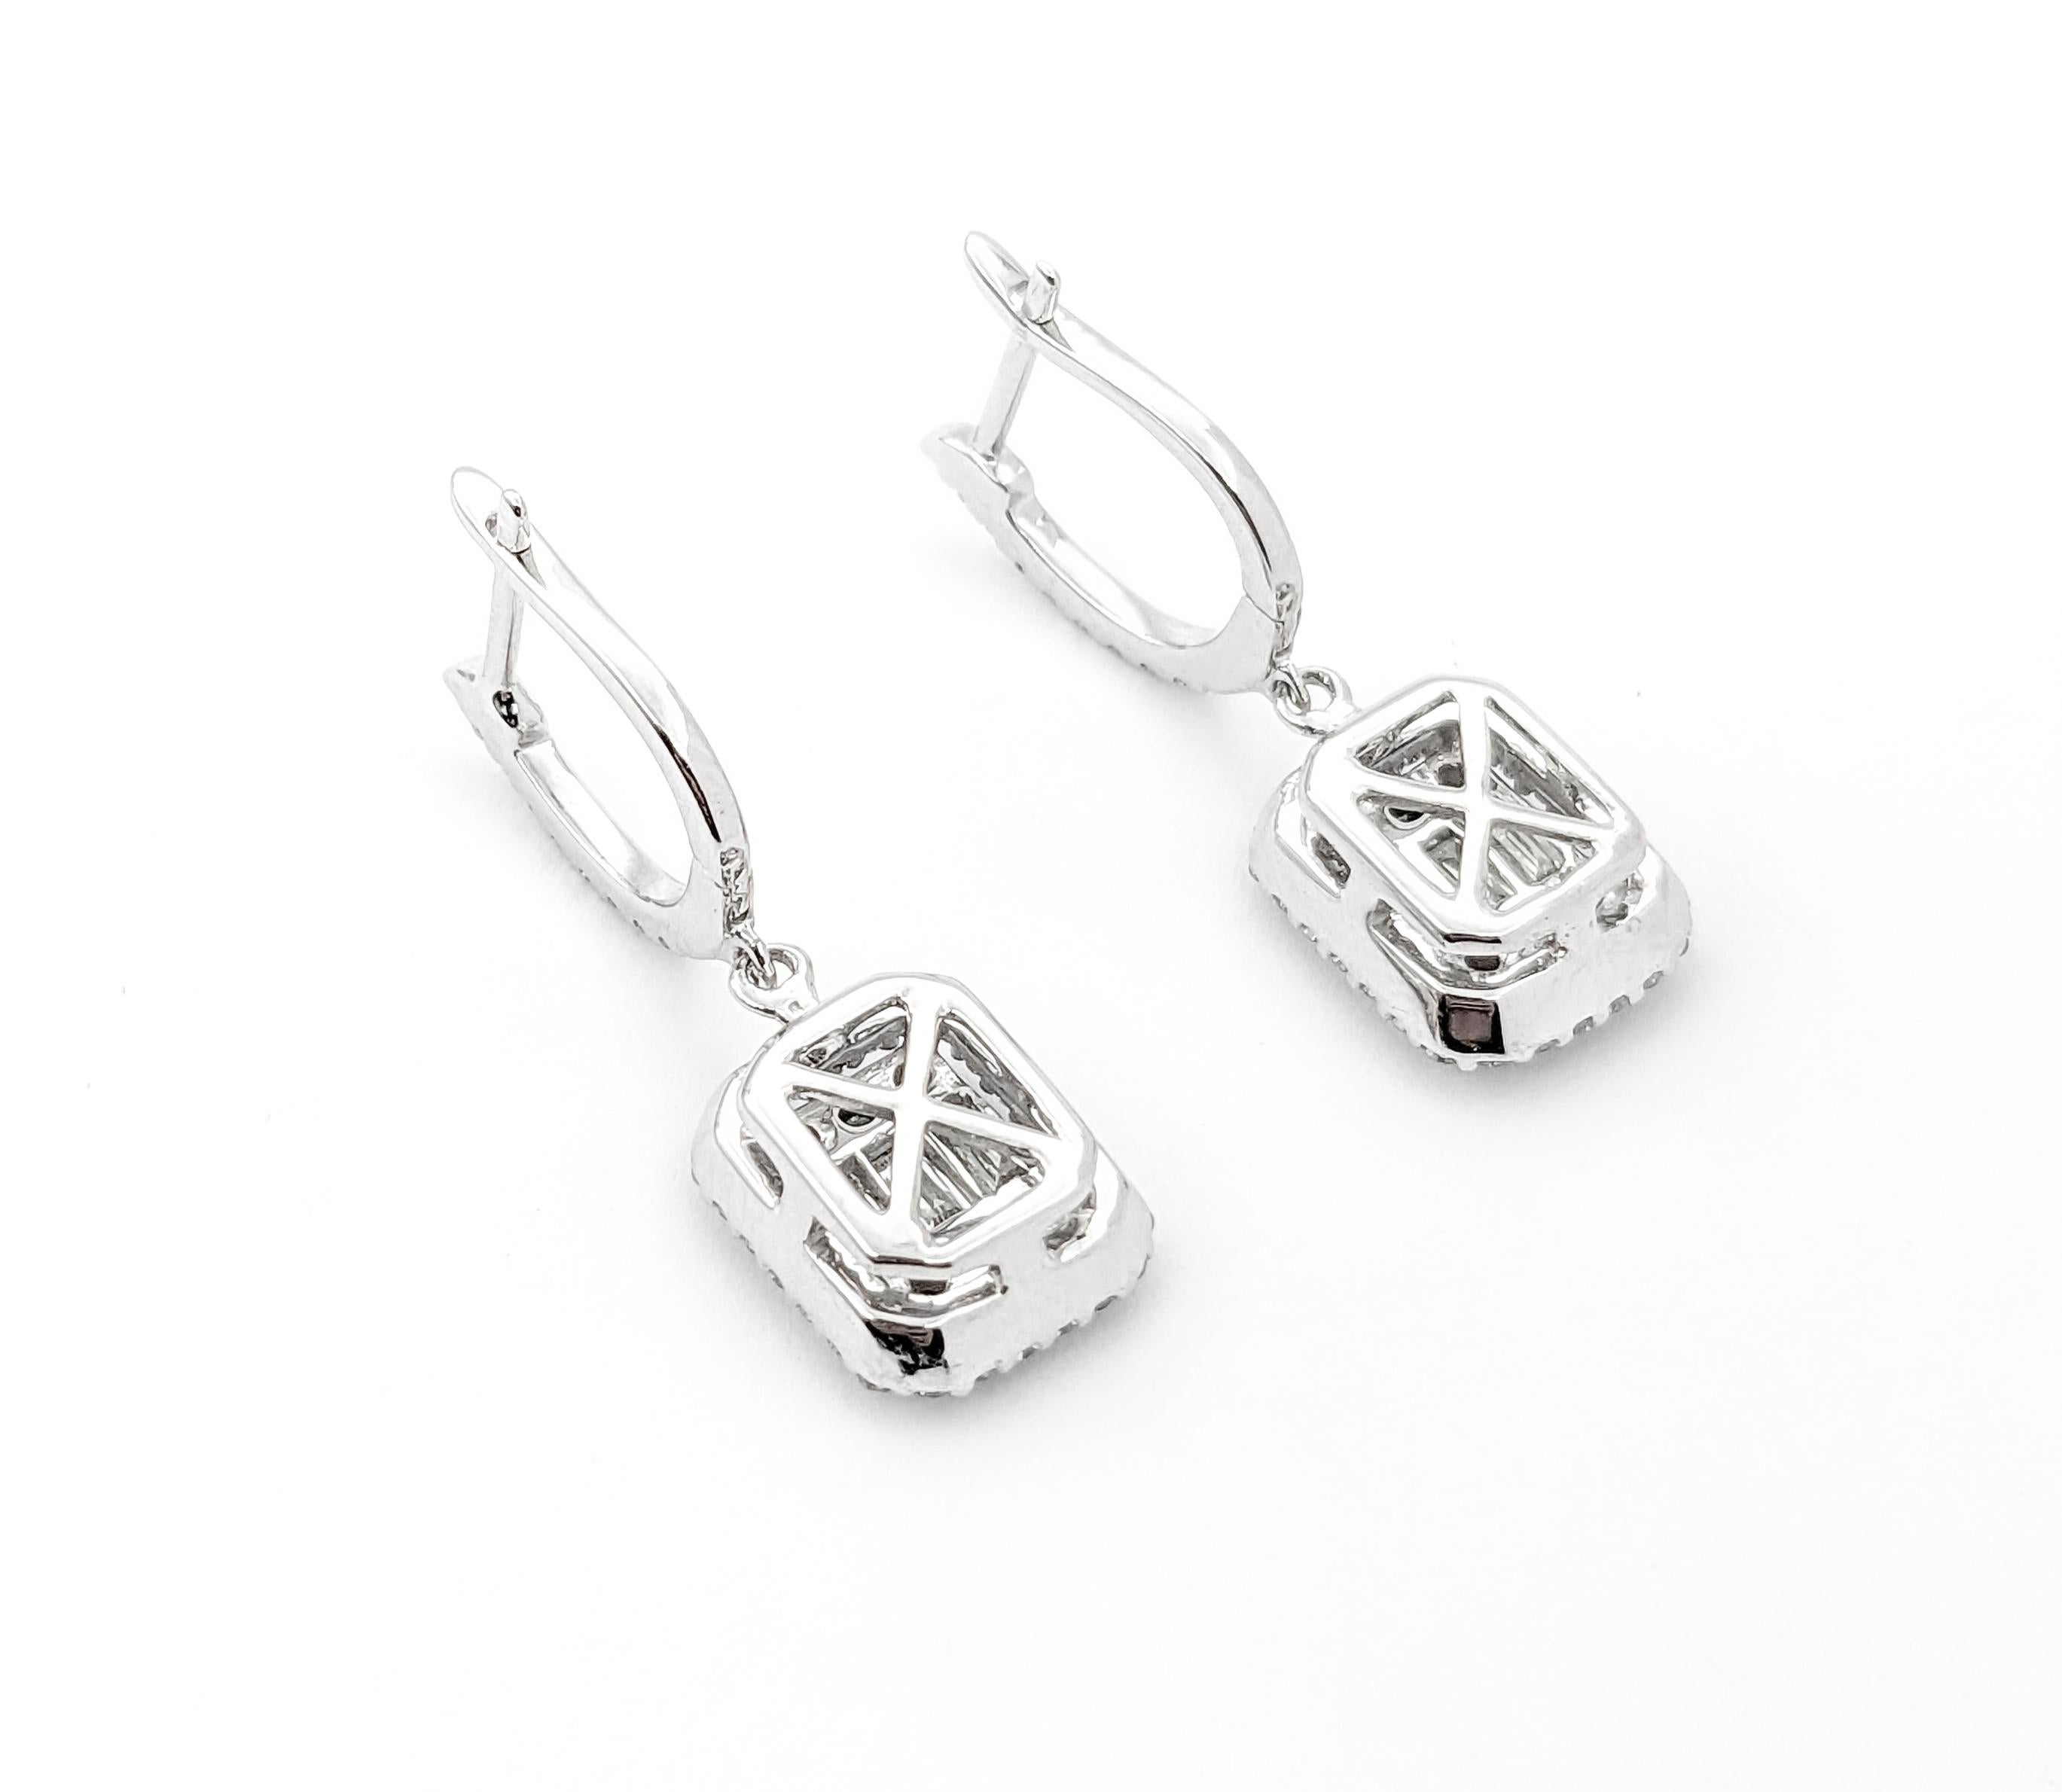 1.25ctw Diamond Dangle Cocktail style Earrings In White Gold

Presenting these exquisite Diamond Fashion Earrings, meticulously crafted in 14kt White Gold. They showcase an alluring 1.25ctw of diamonds, elegantly designed in a Dangle Cocktail style.